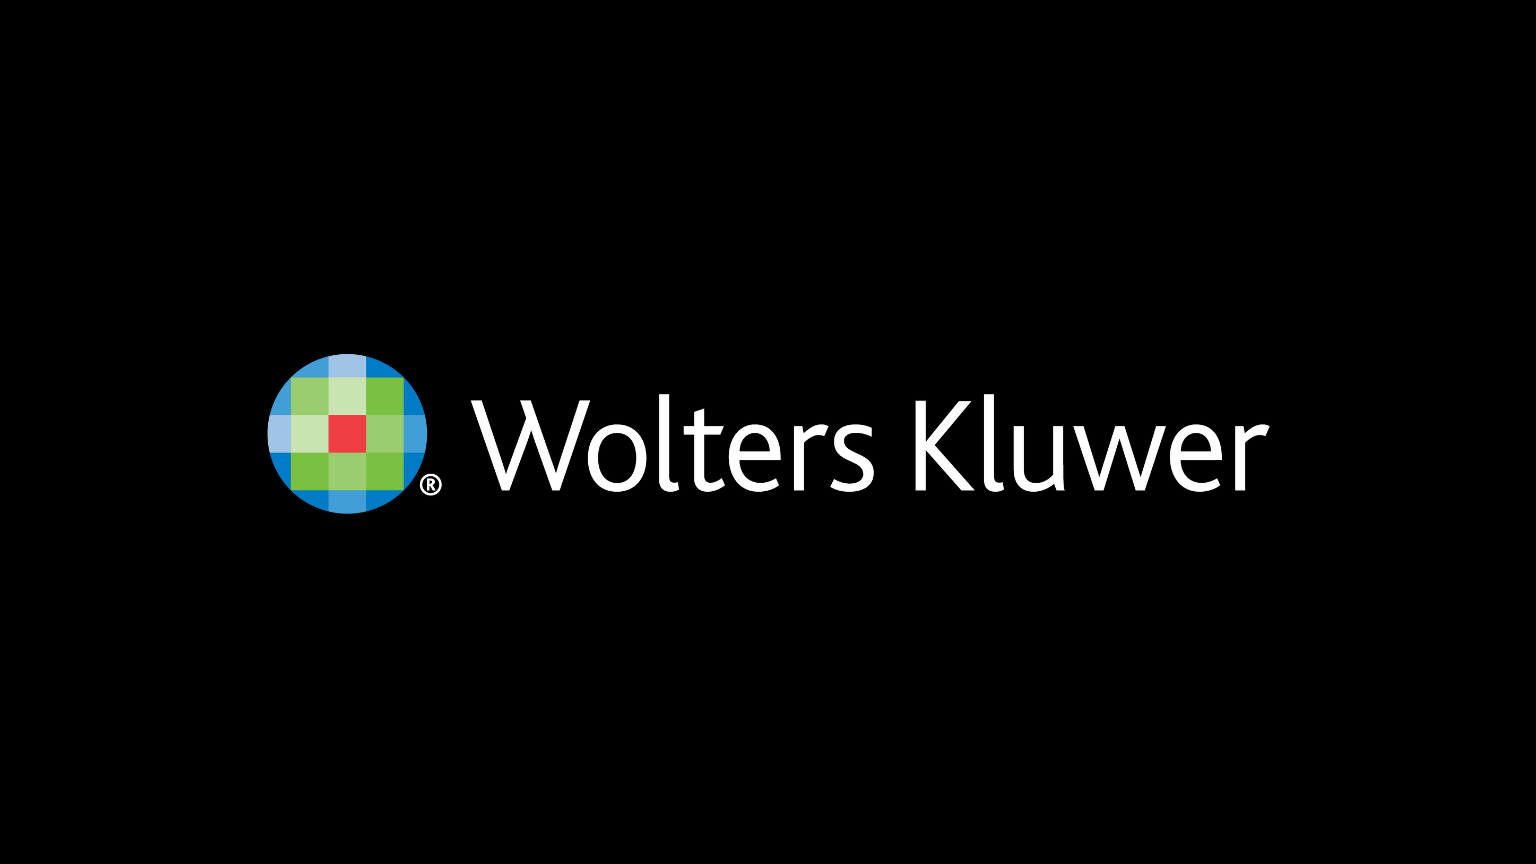 Wolters Kluwer Logo on black background